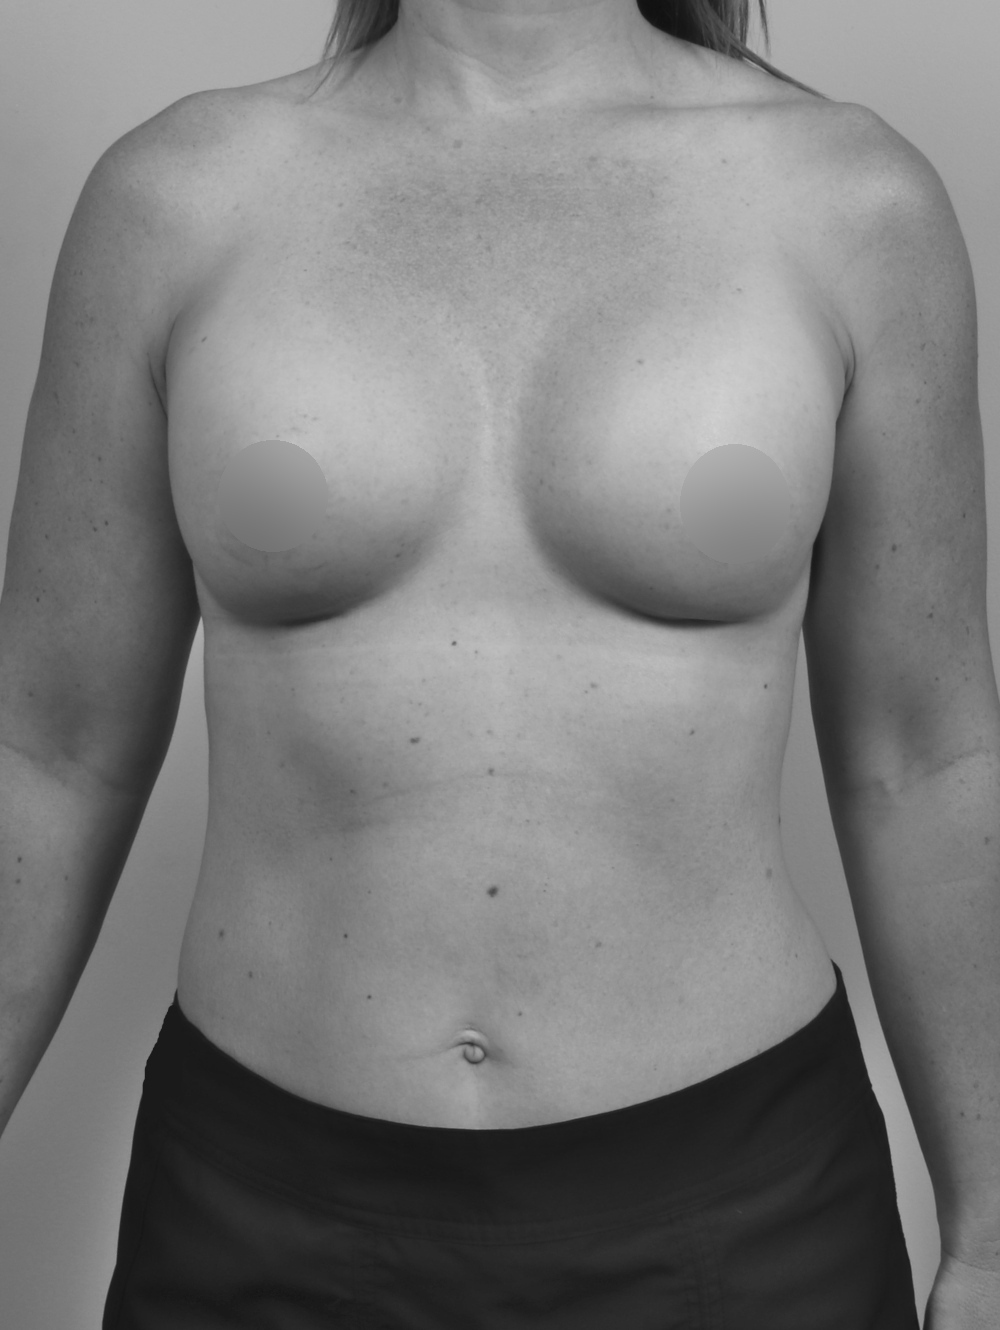 Breast Augmentation Surgery Before Pregnancy - Is It a Good Idea?